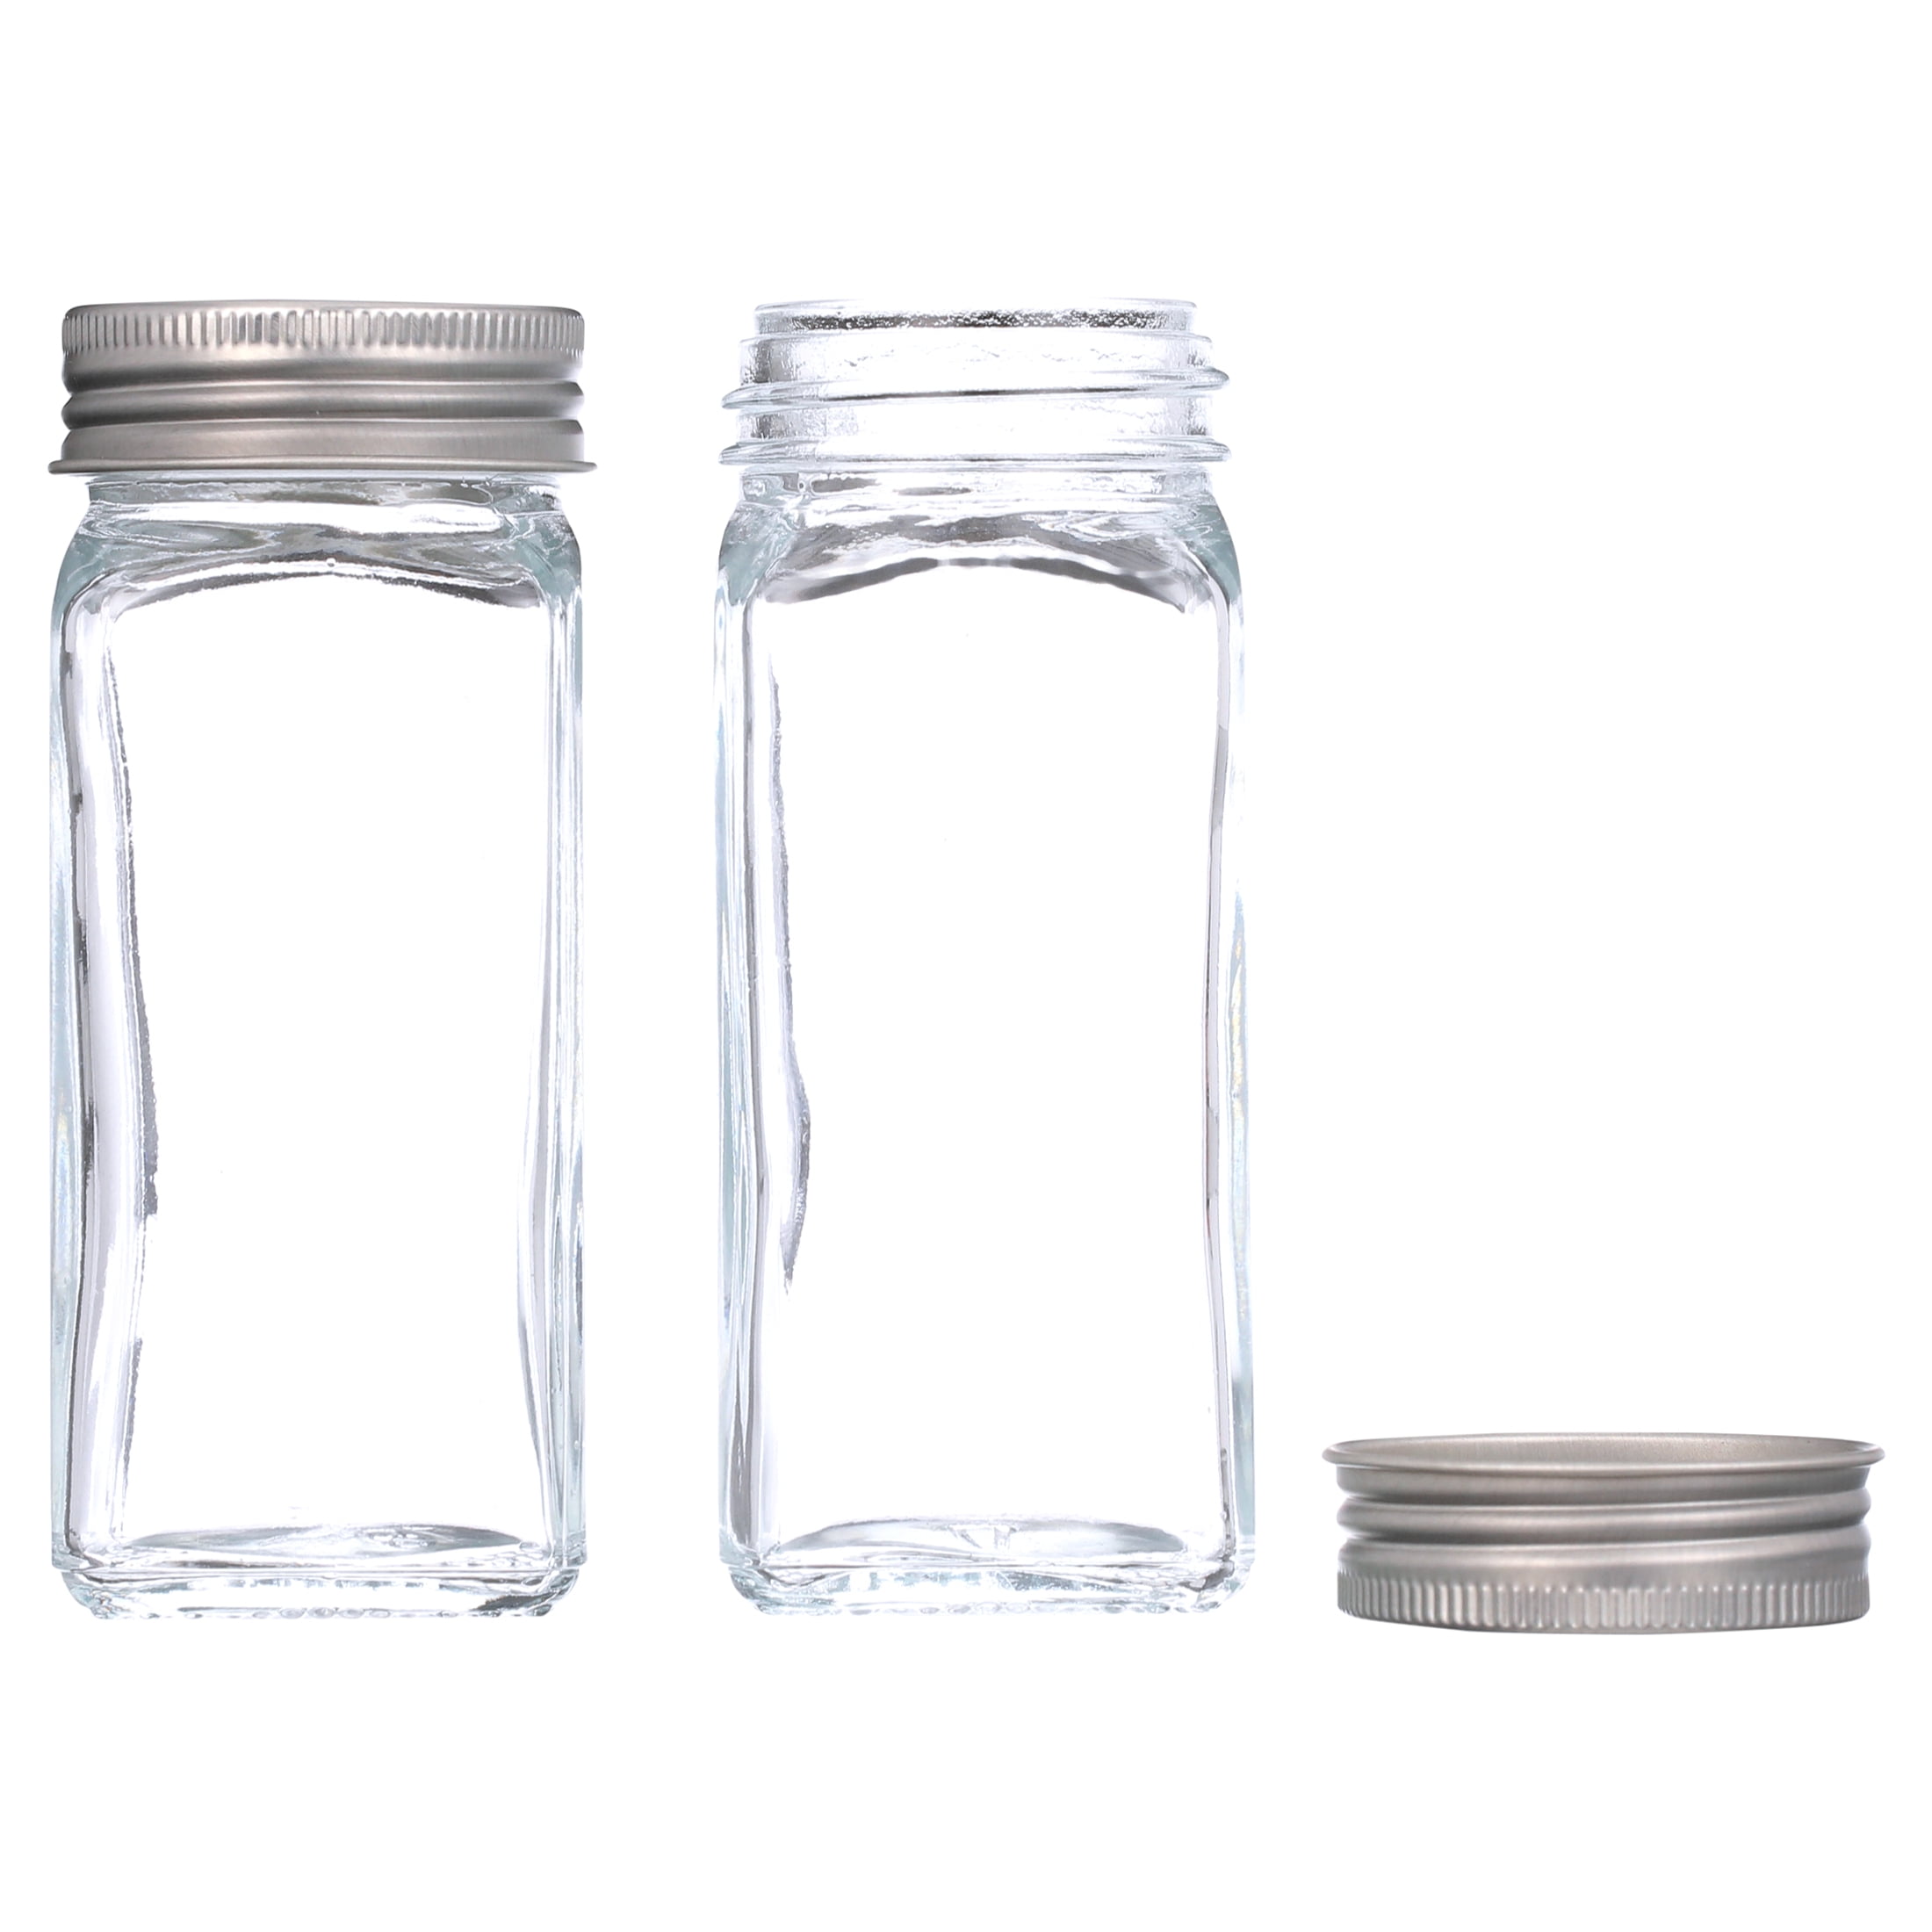 Datttcc 52 Pack Glass Spice Jars,Reusable Clear 4 OZ Square Seasoning  Containers with Silver Metal Caps and Pour/Sift Shaker Lids Spice Jars with